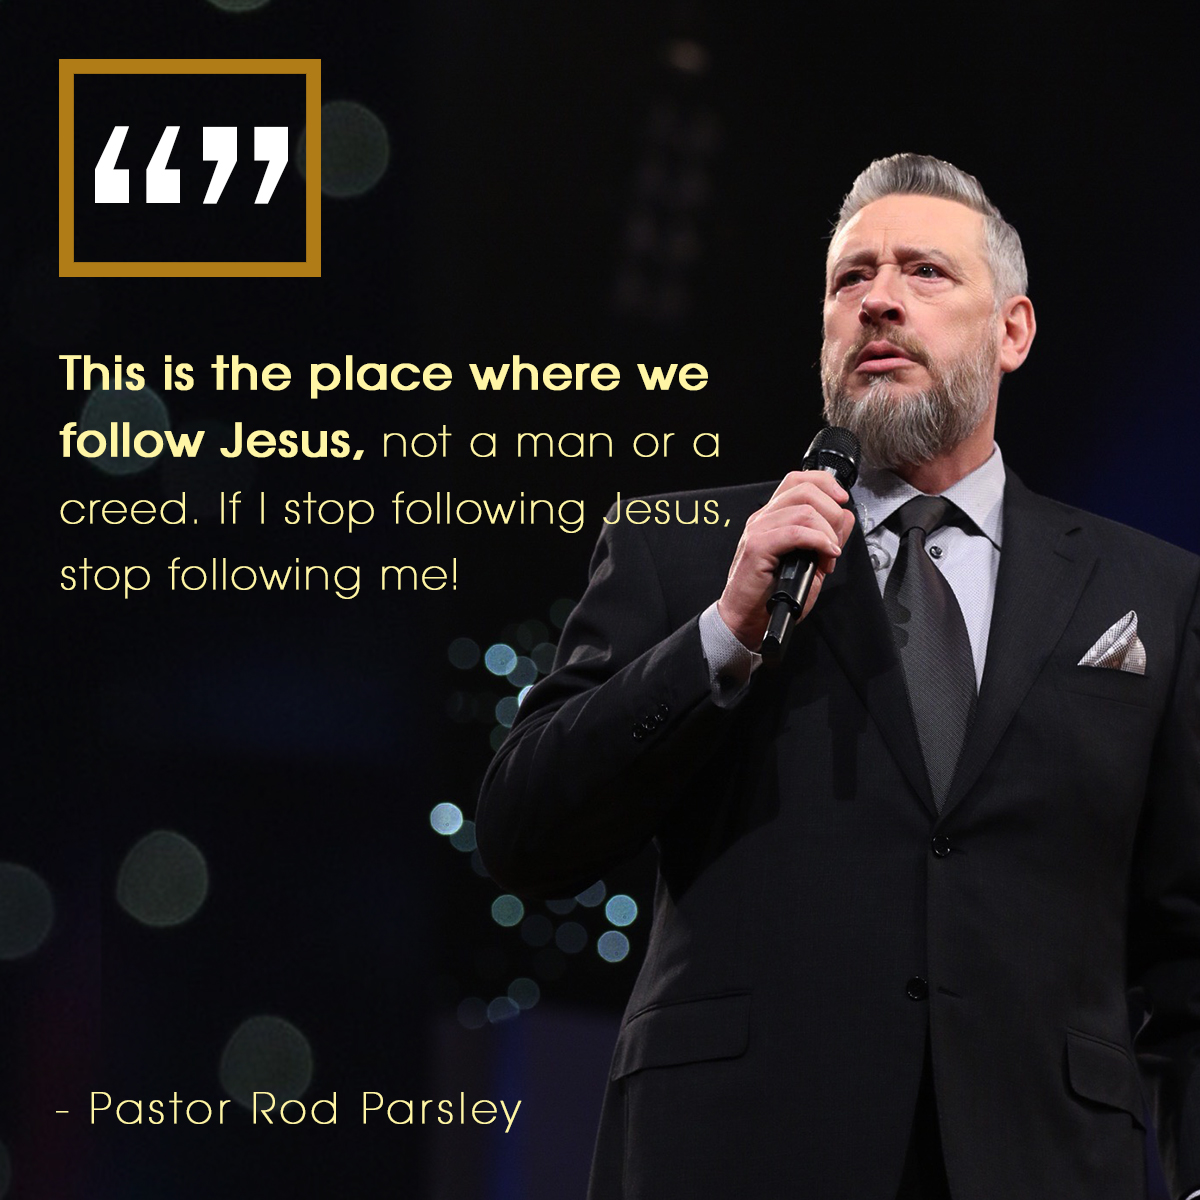 “This is the place where we follow Jesus, not a man or a creed. If I stop following Jesus, stop following me!” – Pastor Rod Parsley